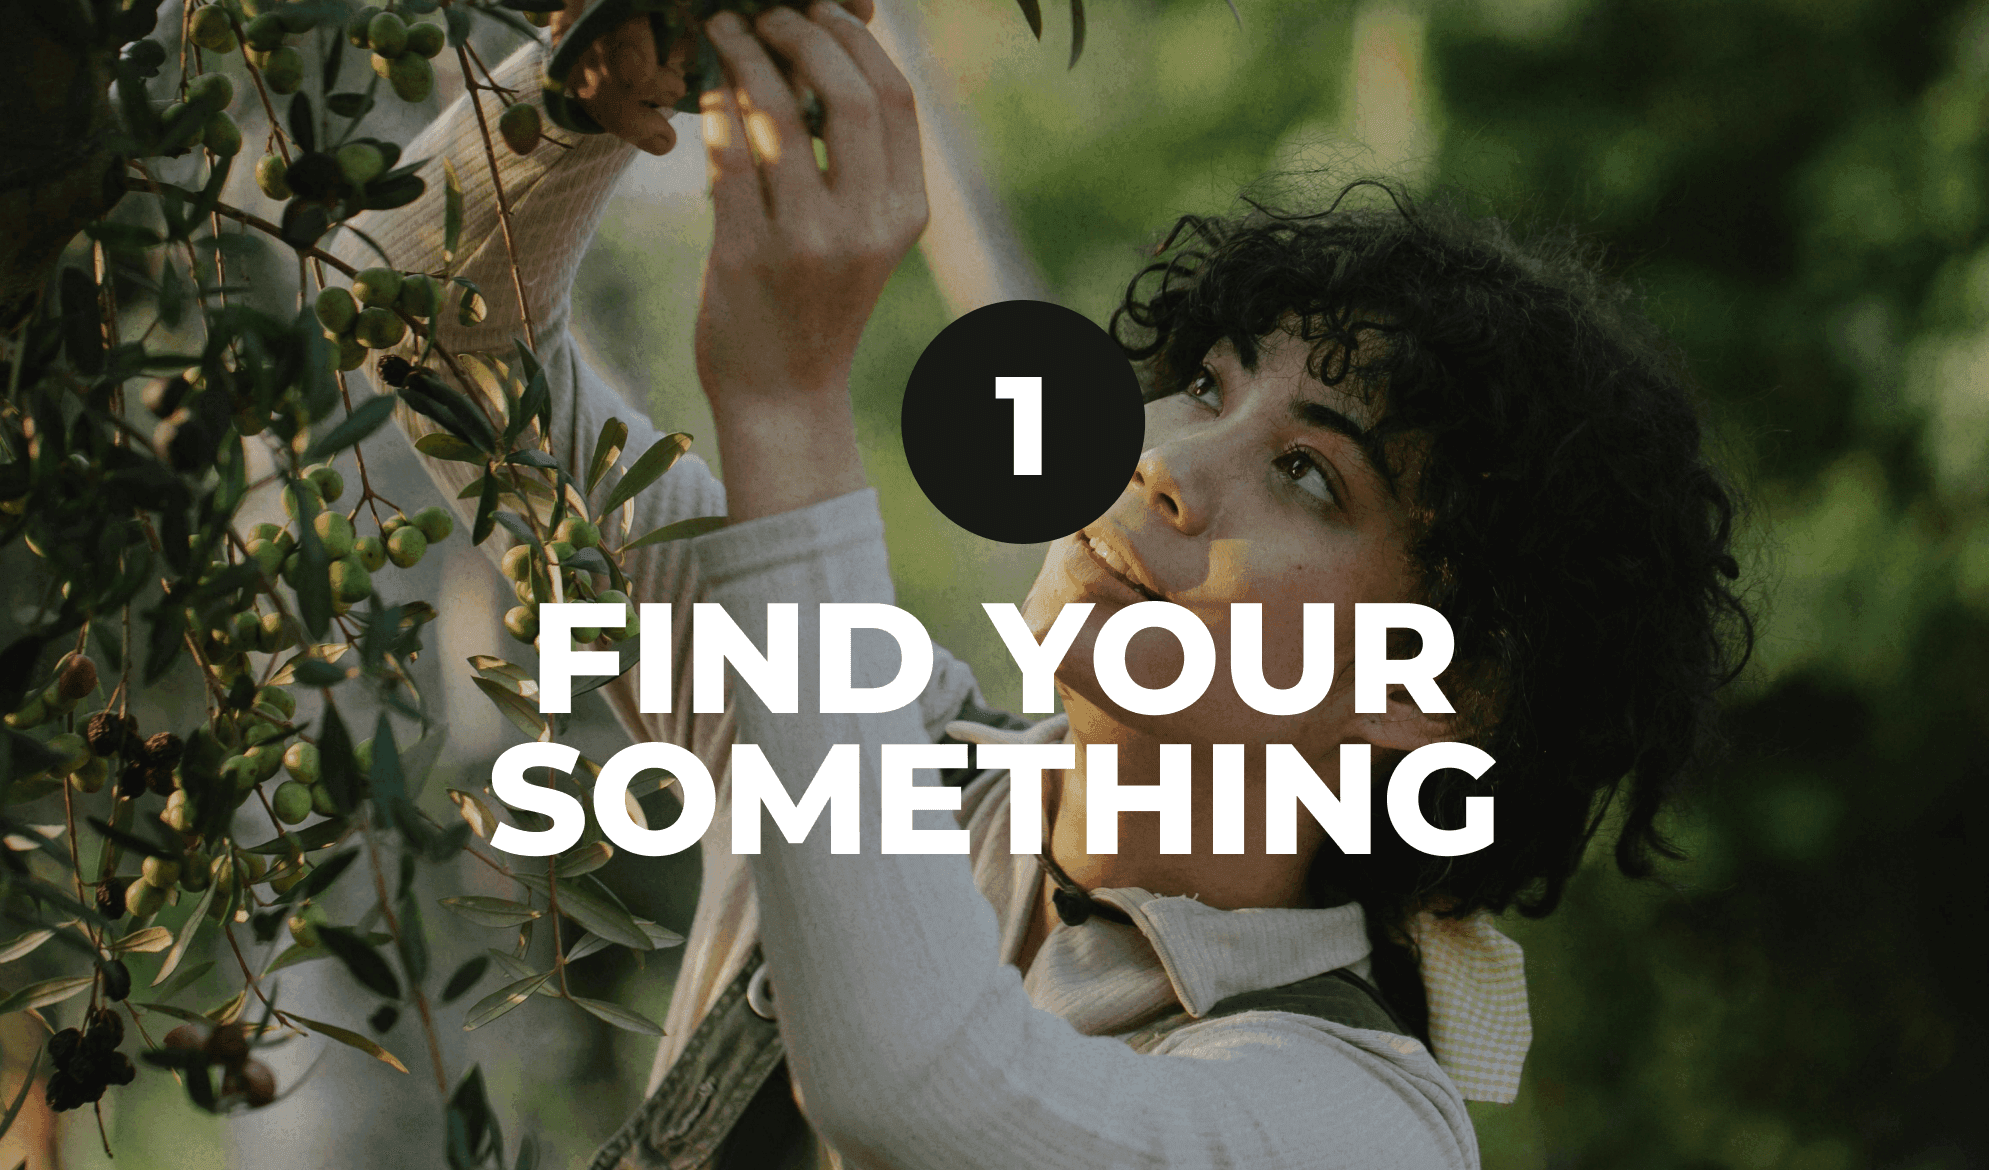 Title: "1. Find your something" (With image of person picking fruit off of a tree)